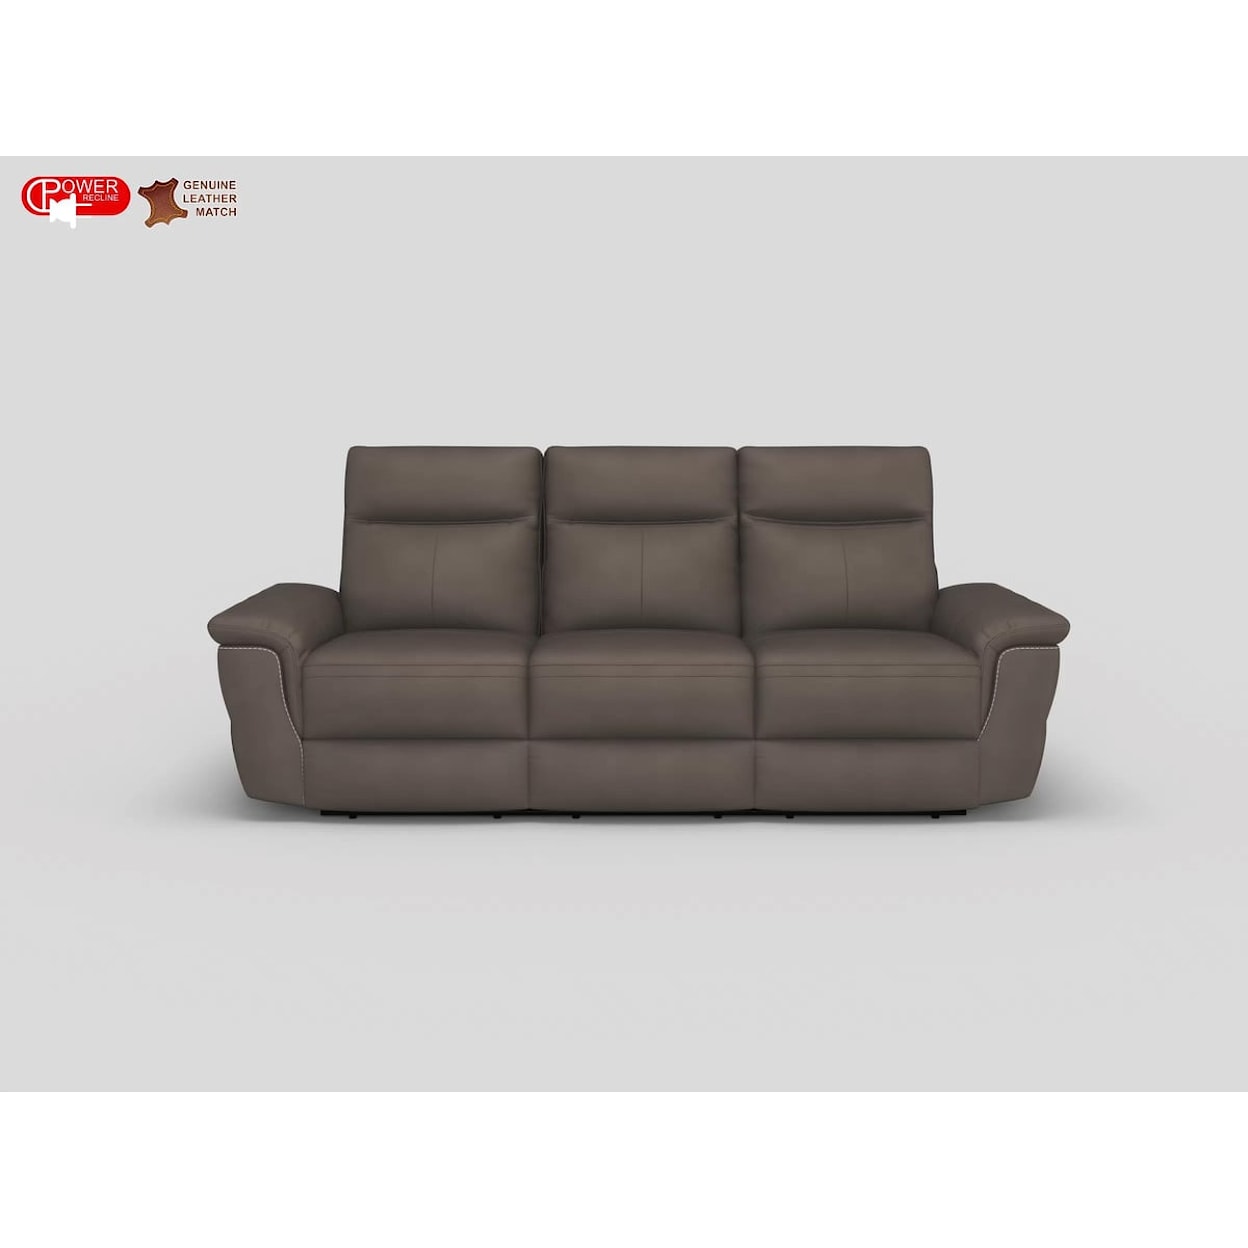 Homelegance Furniture Olympia Double Reclining Sofa